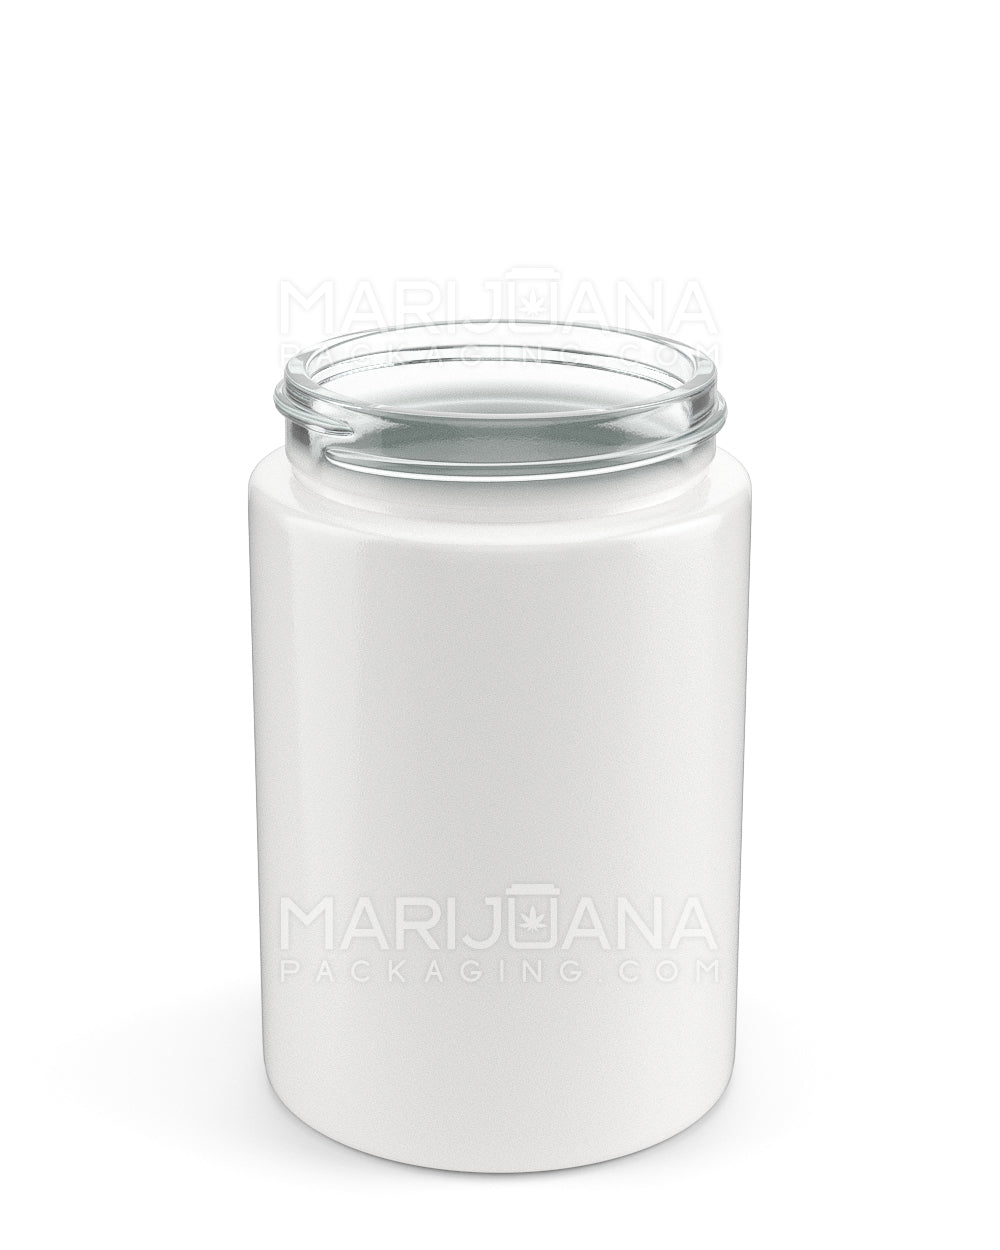 Straight Sided Glossy White Glass Jars | 50mm - 5oz - 100 Count - 2